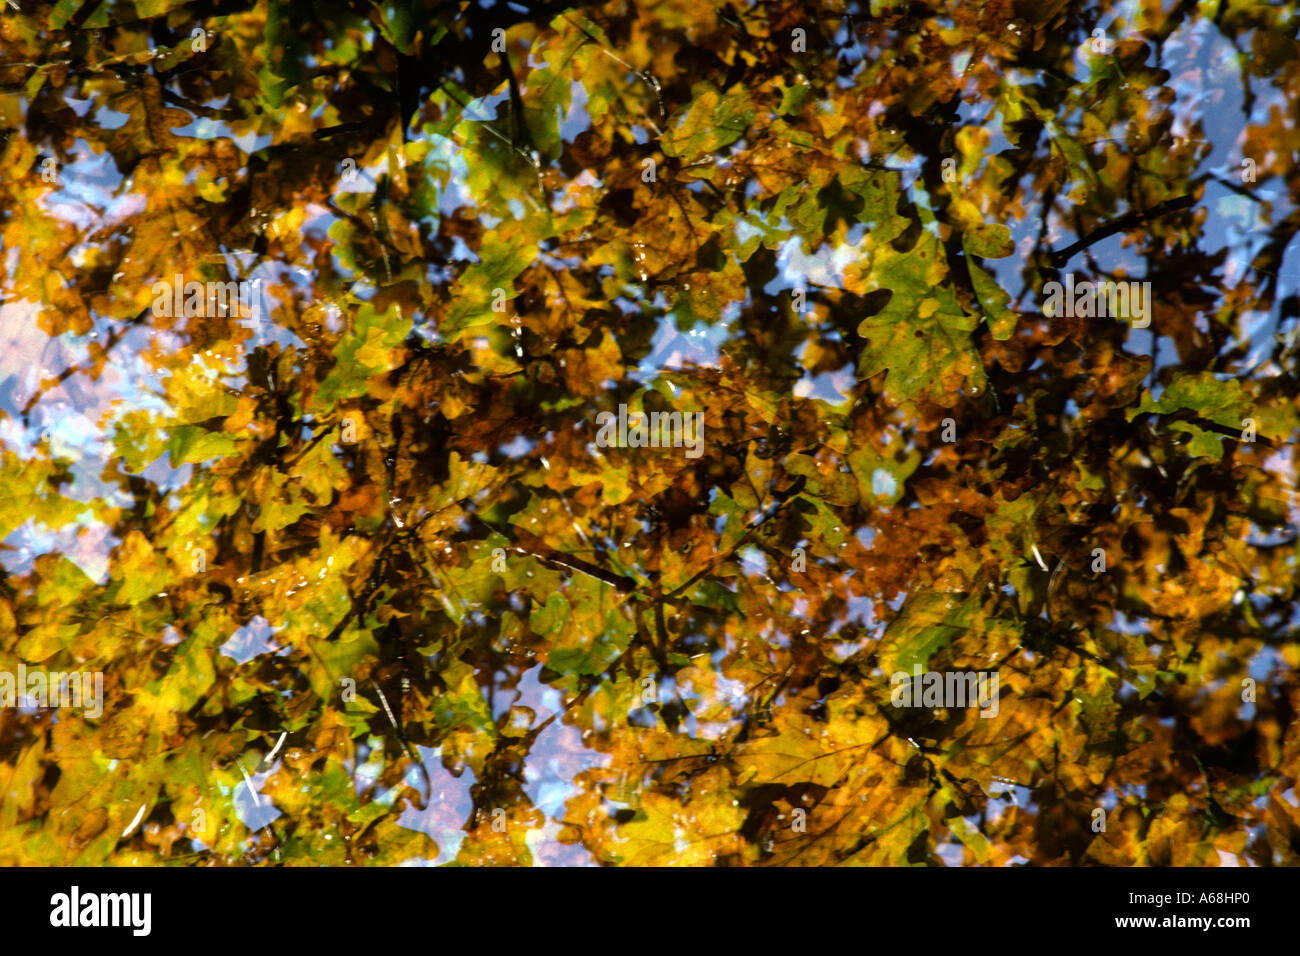 Multiple exposure of Oak (Quercus robar) leaves in Autumn, against a clear blue sky. Stock Photo